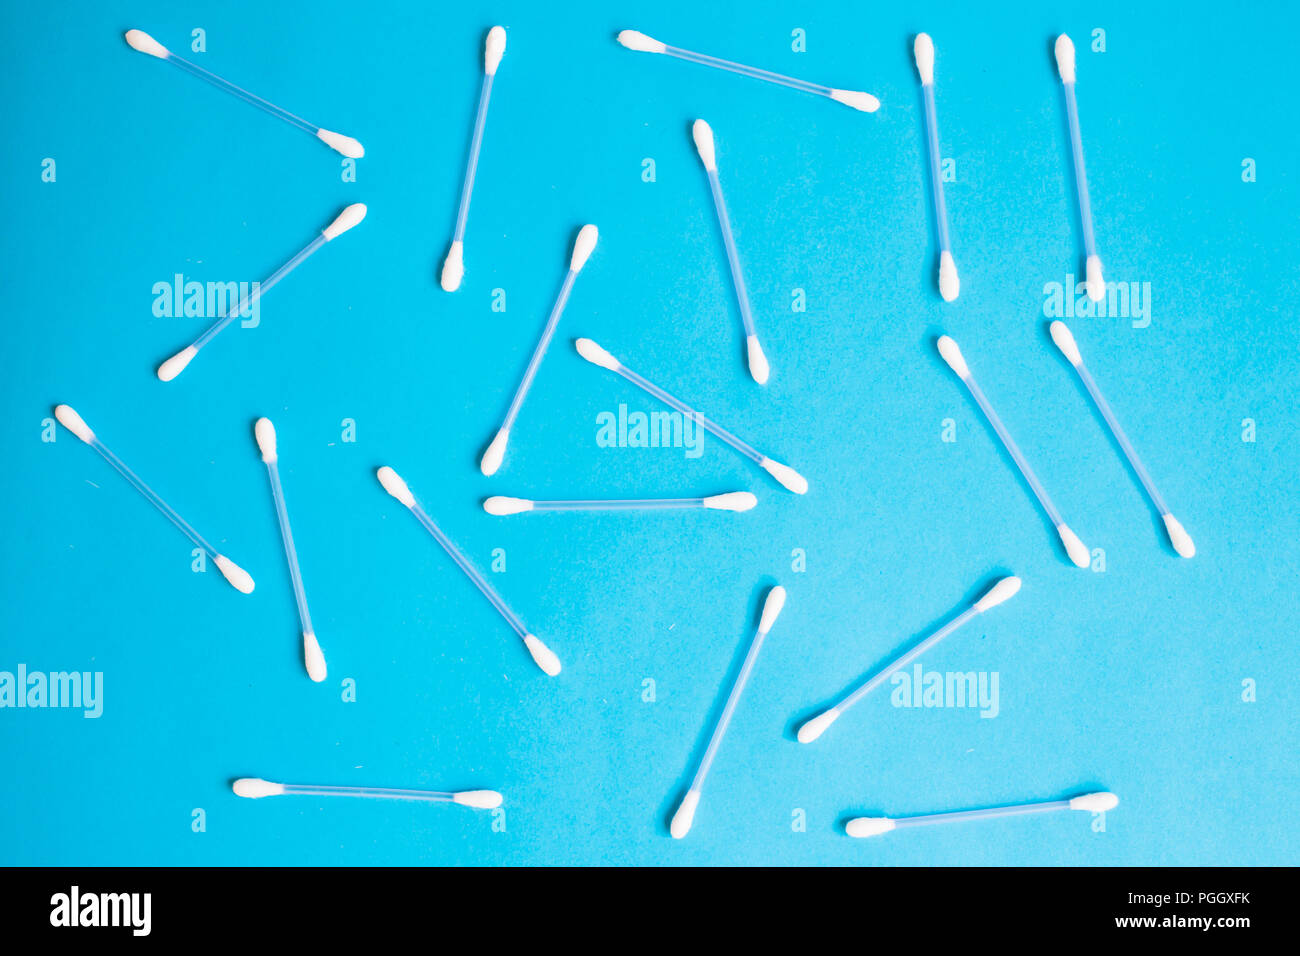 the pattern of the cotton buds on a blue background Stock Photo